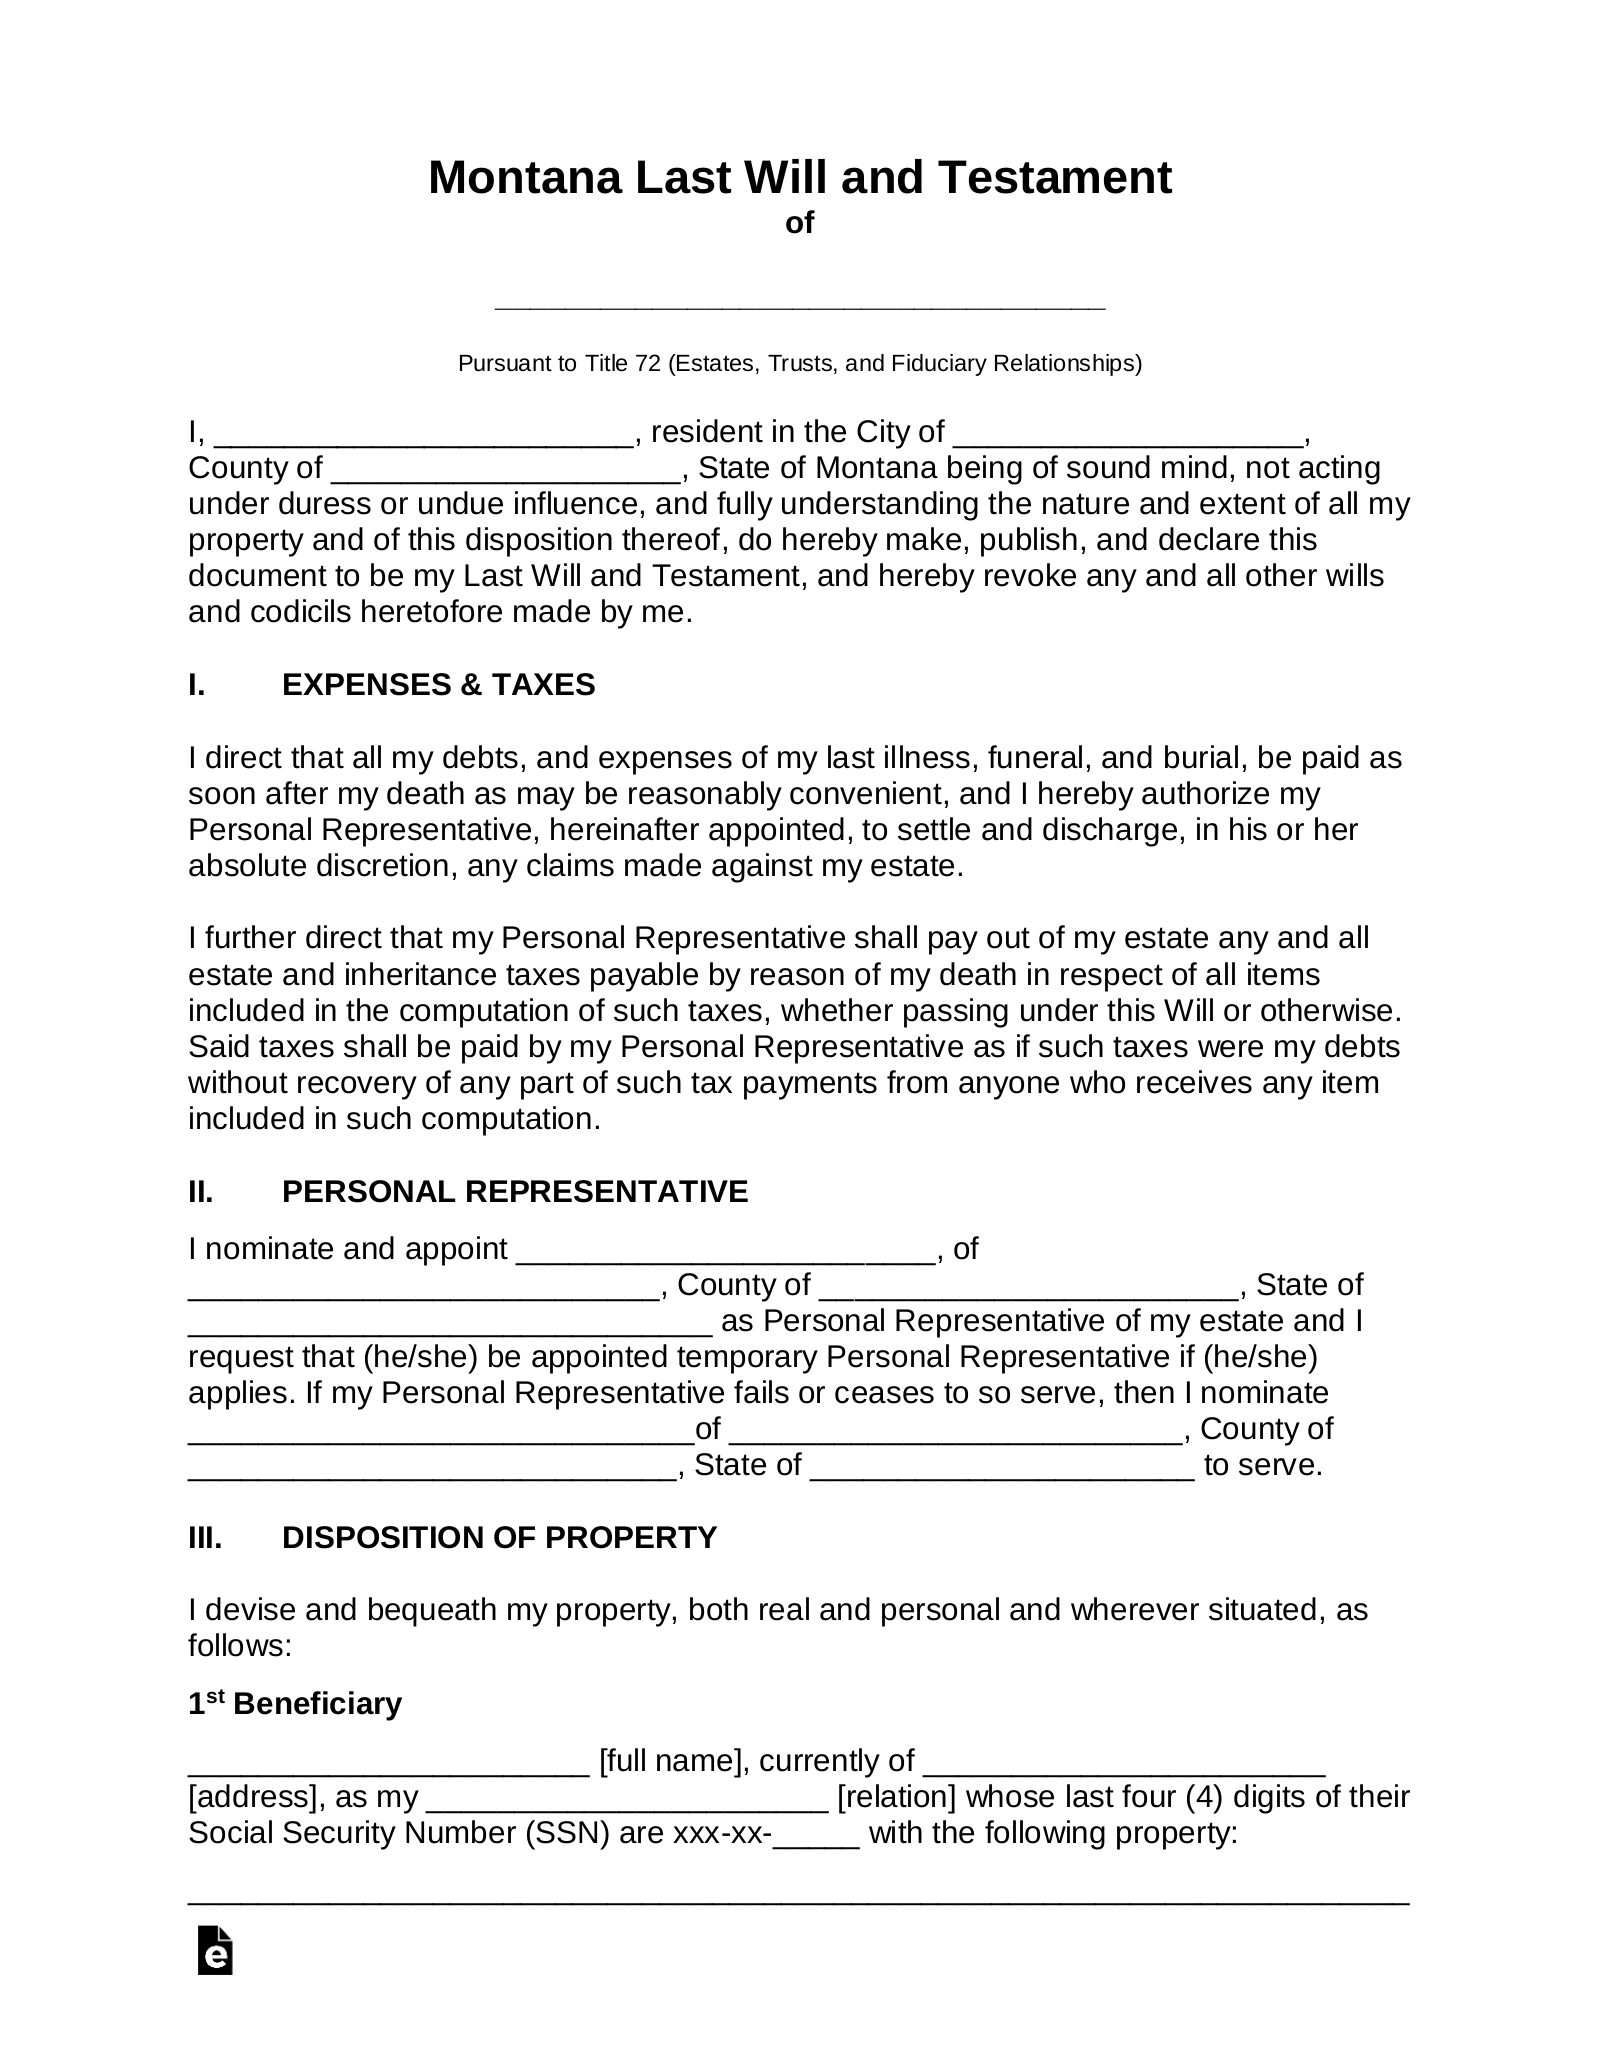 Montana Last Will and Testament Template